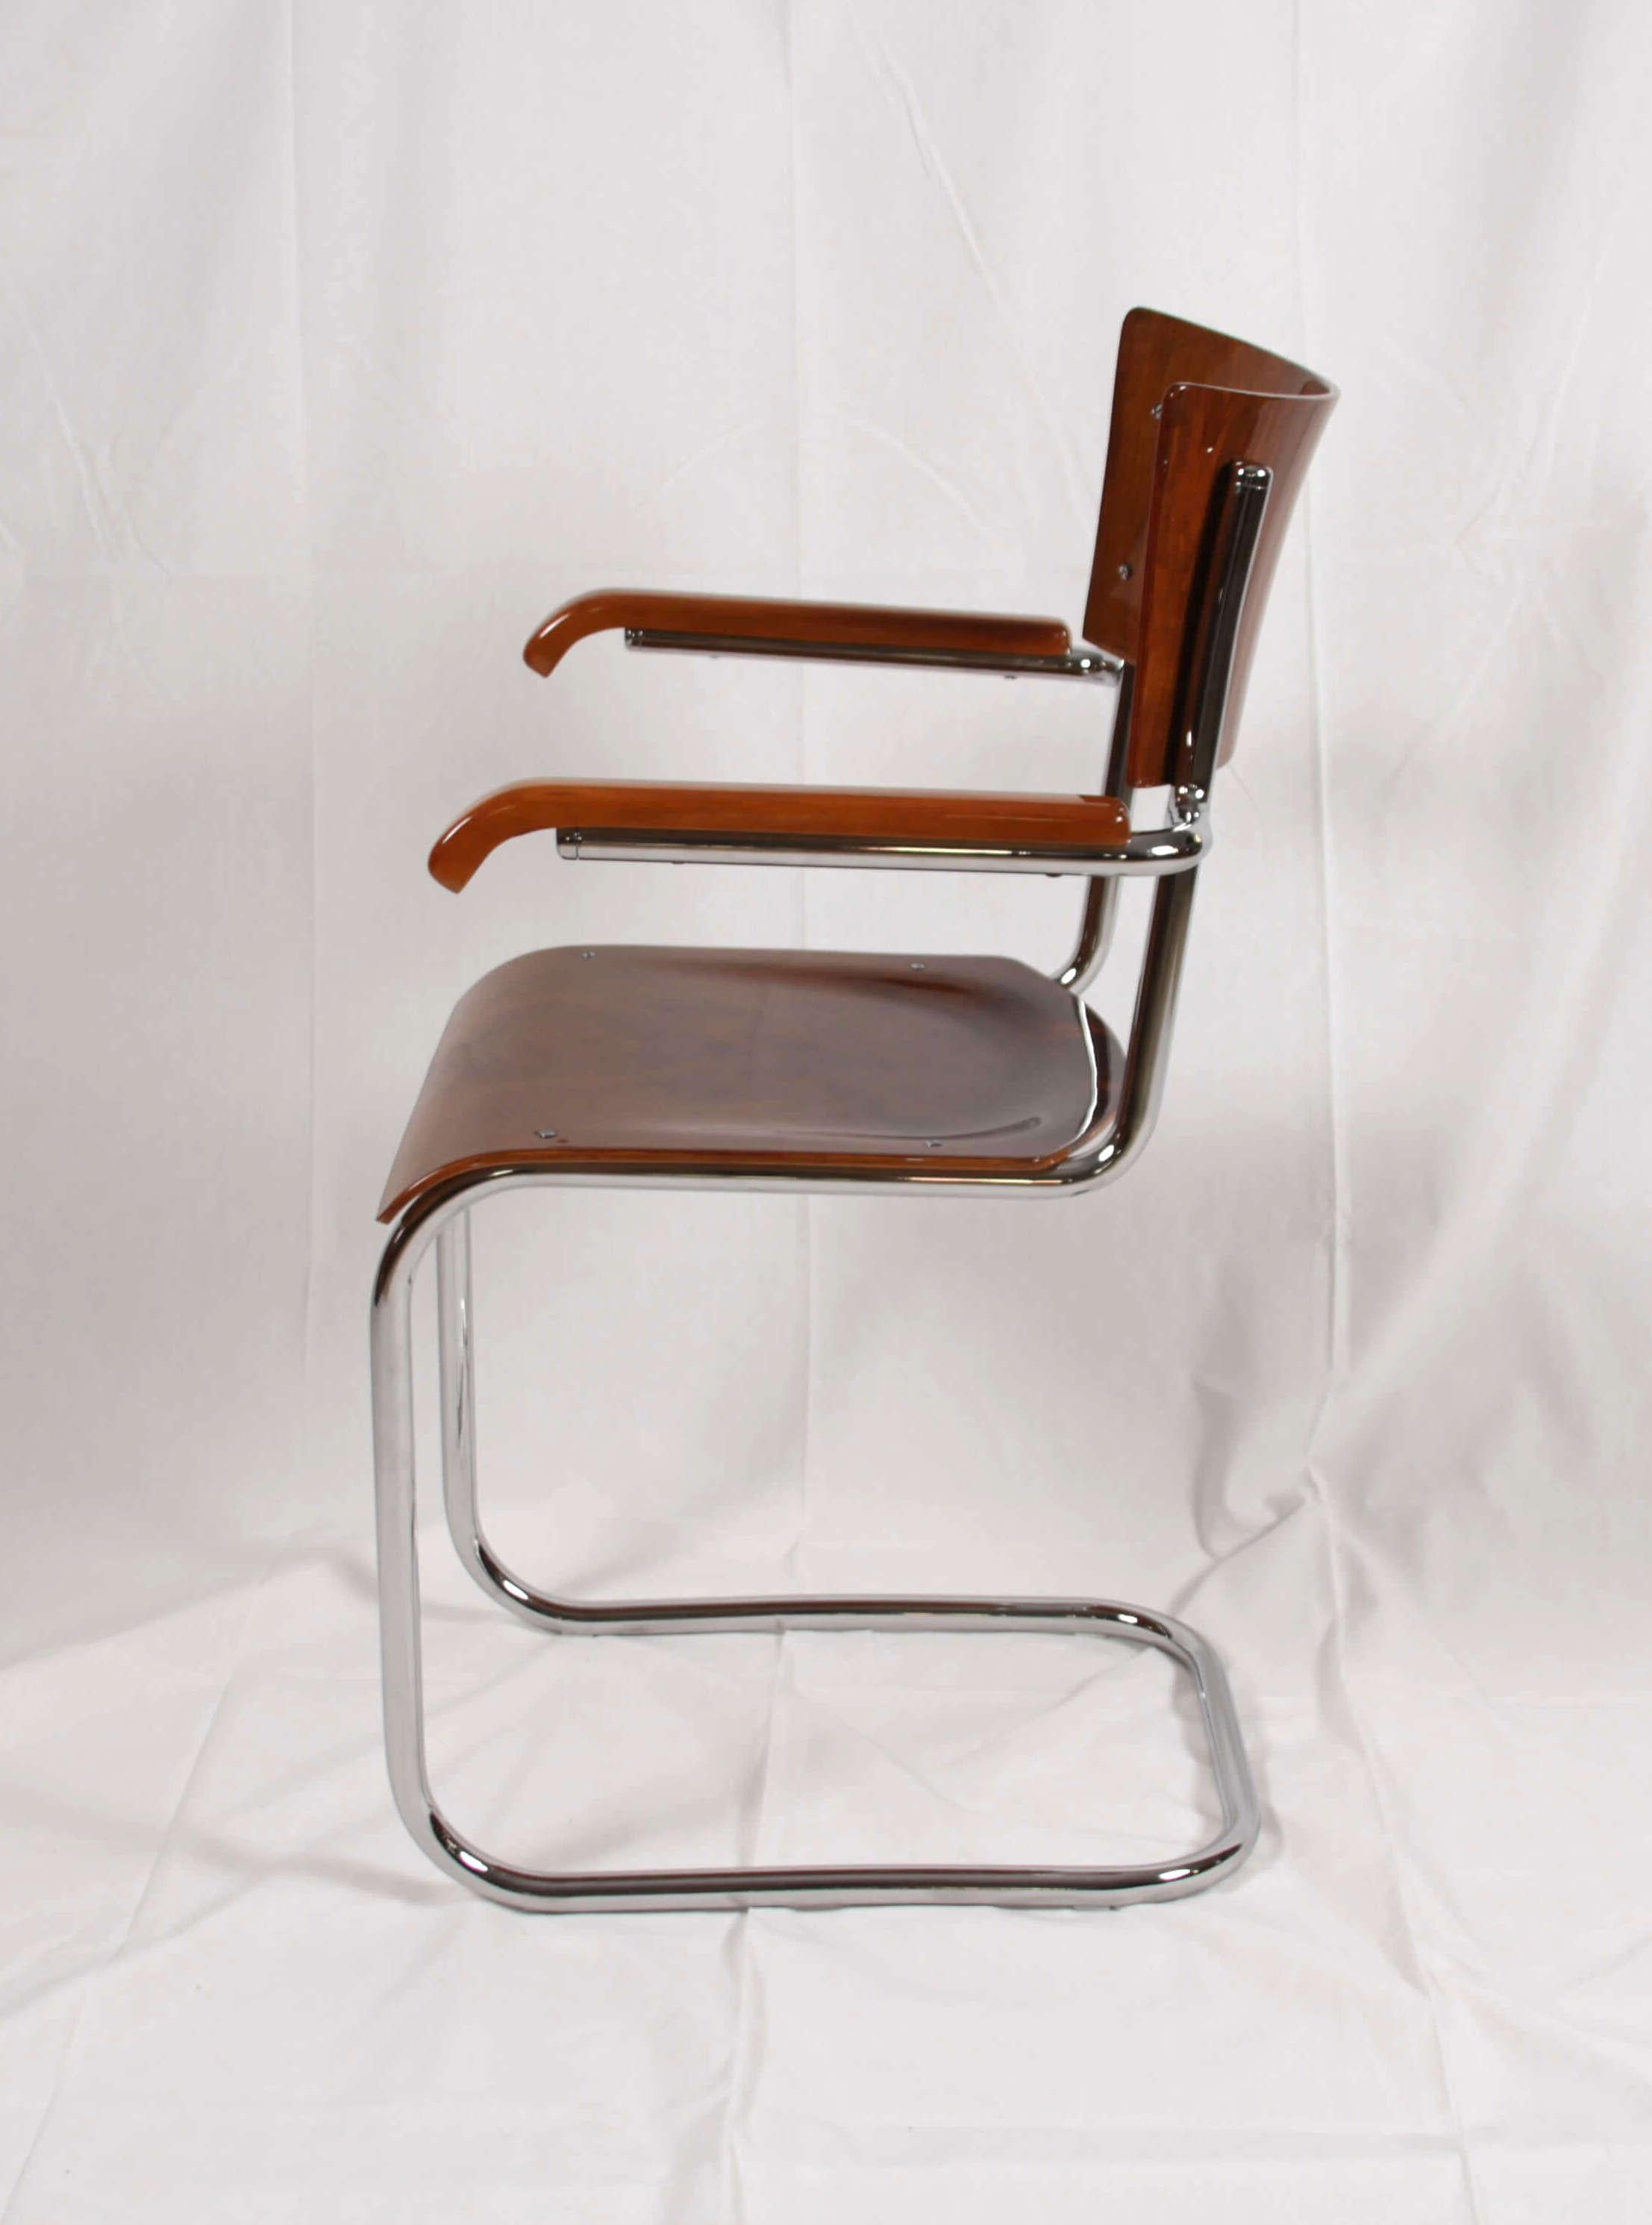 Mid-20th Century Restored Bauhaus Cantilever Seating Group, Walnut and Chrome, Czech, circa 1930